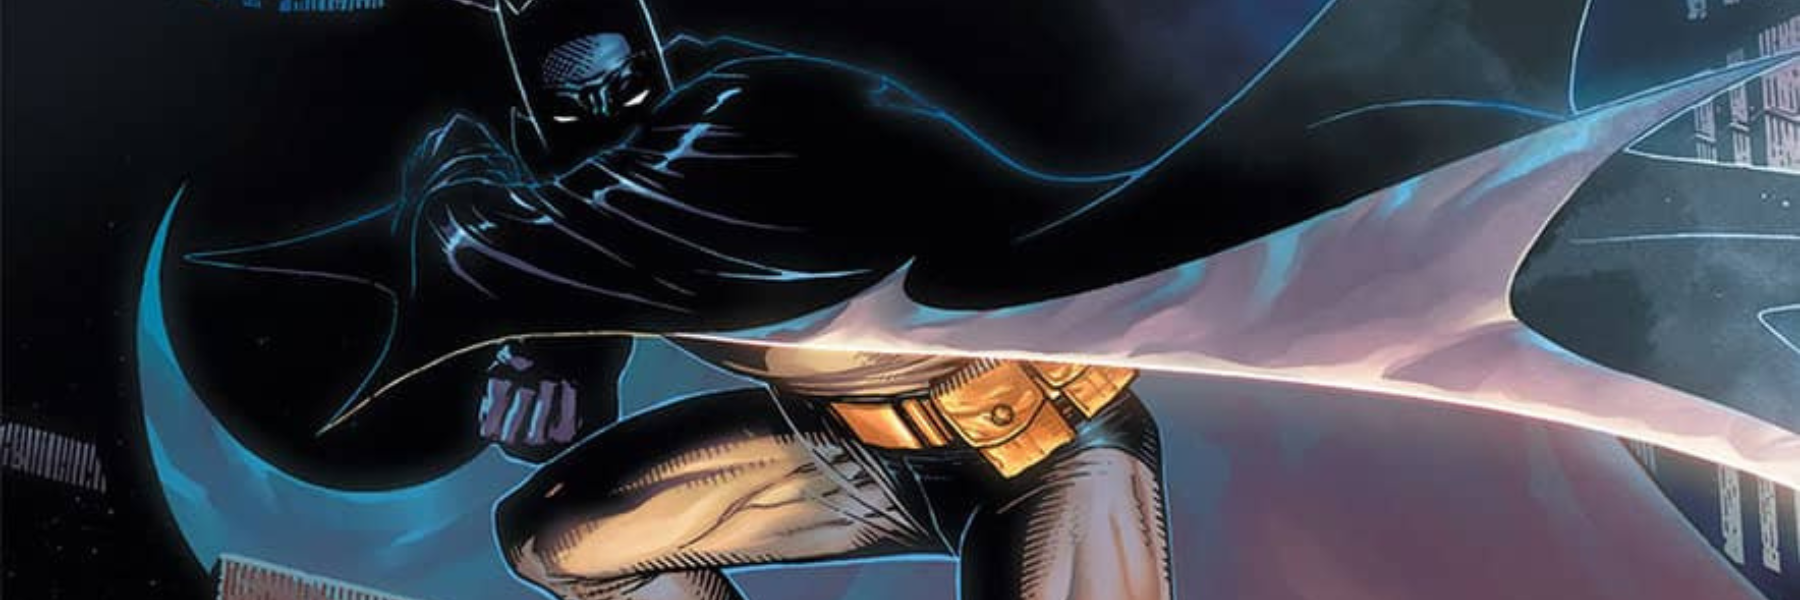 Batman: The Brave and the Bold Returns with Exciting New Stories!